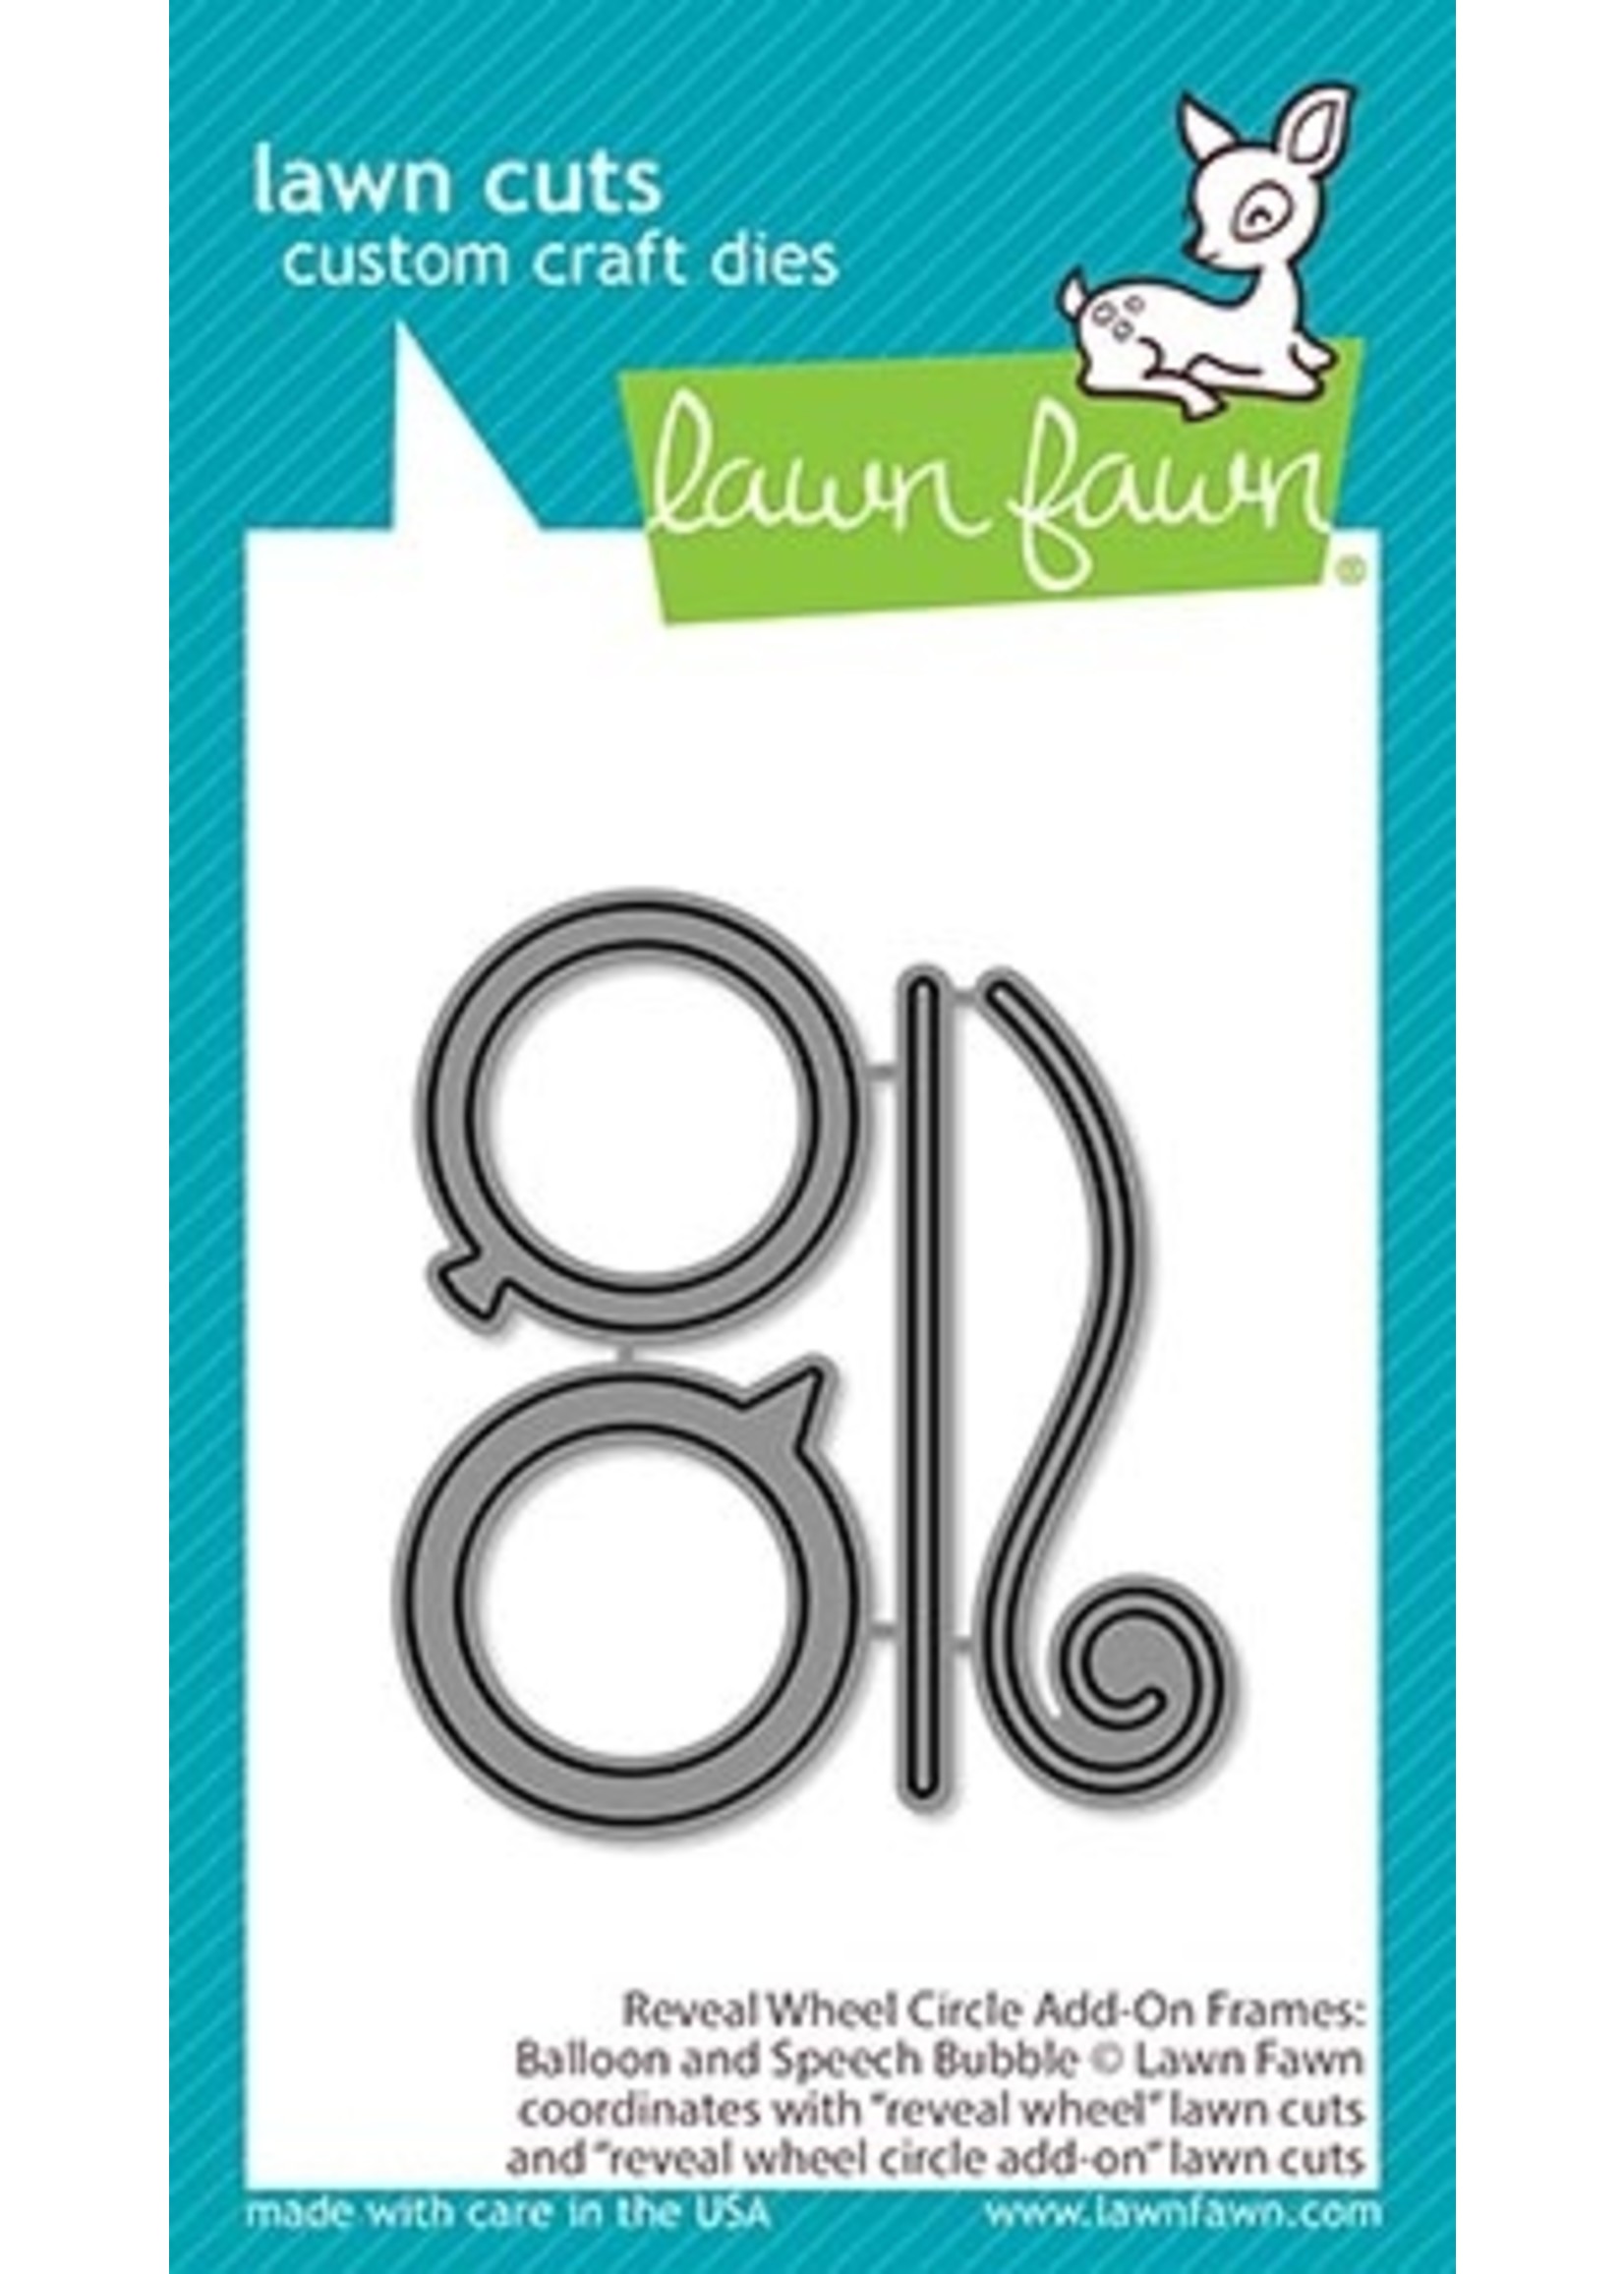 Lawn Fawn Dies reveal wheel circle add-on frames: balloon and speech bubble